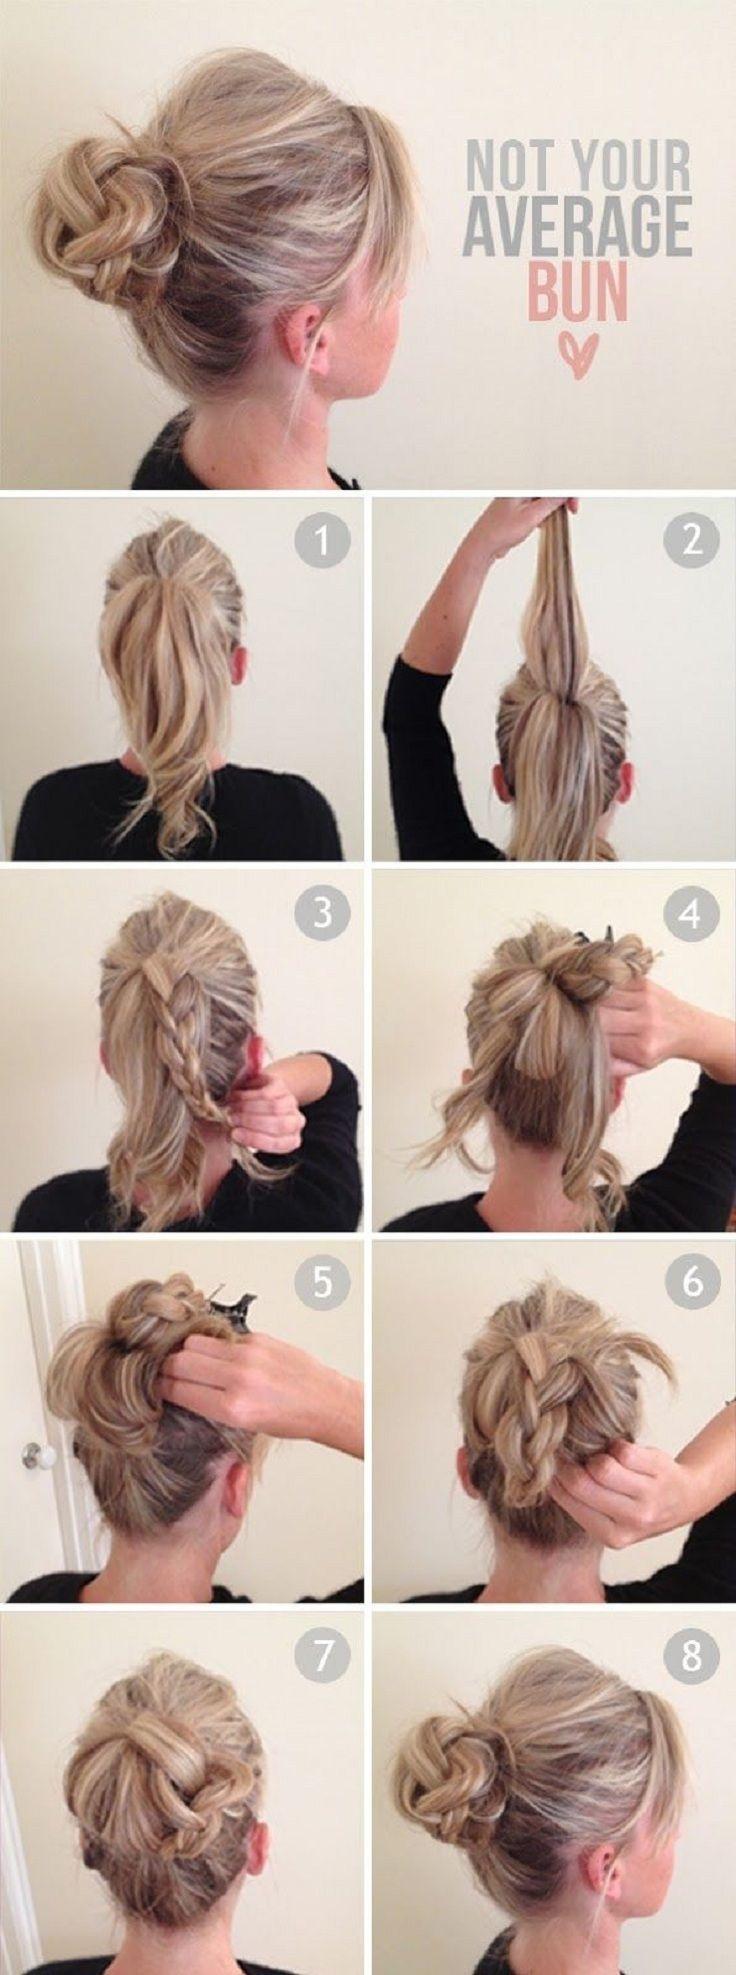 Wedding - Top 10 Hairstyle Tutorials For This Fall